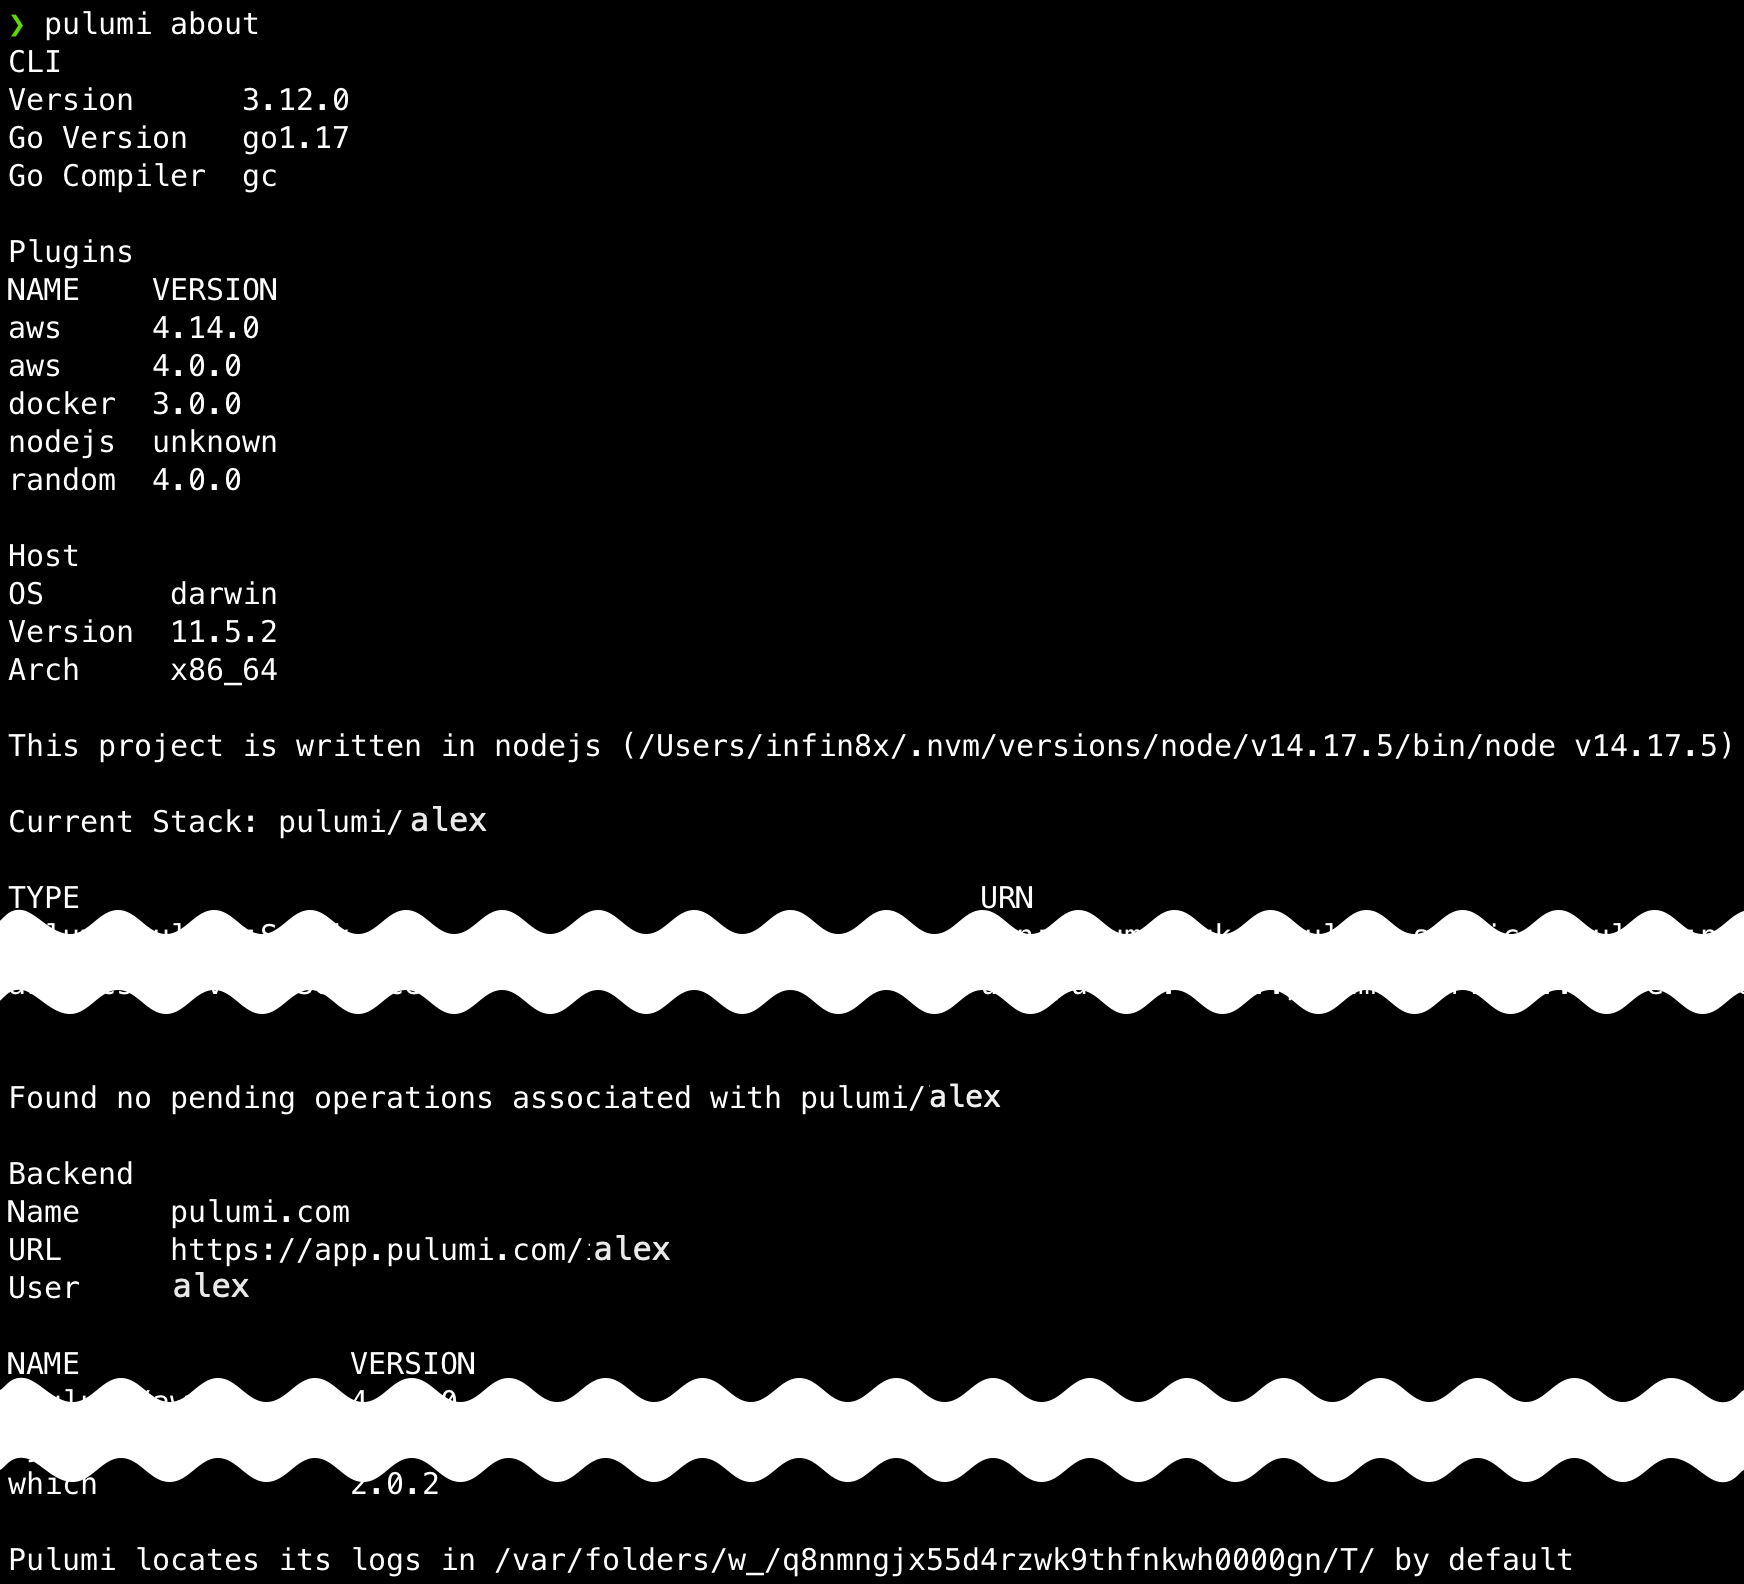 A screenshot of the output of the pulumi about command